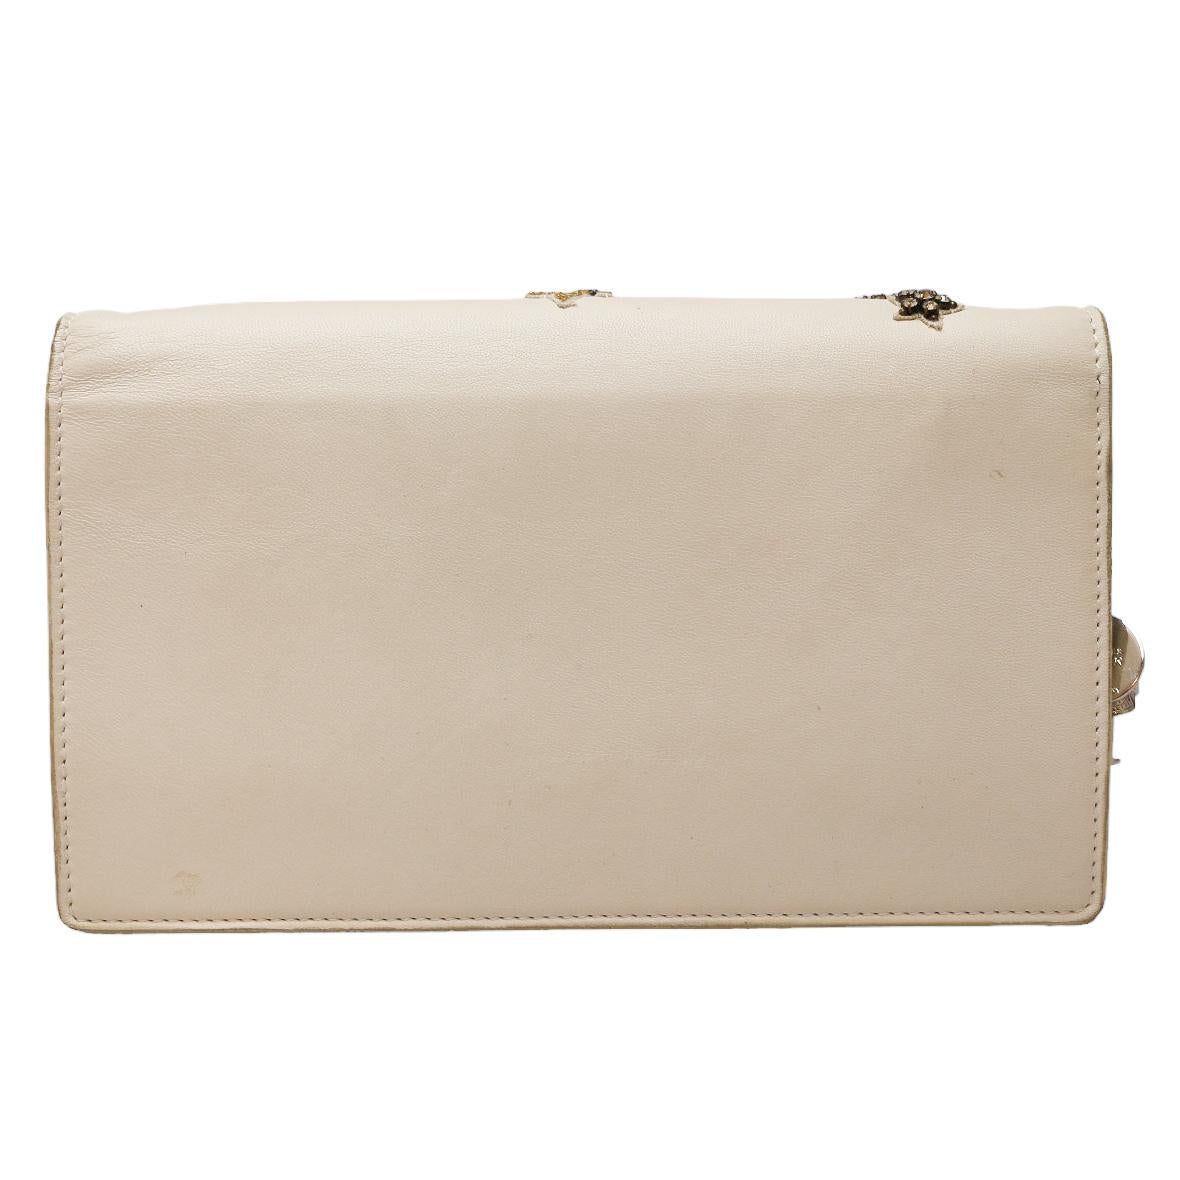 Charming ALEXANDER McQUEEN leather jewel bag
Condition: very good
Made in Italy
Material: leather
Color: white
Dimensions: 21 x 12 x 2.5 cm
Chain: 140 cm
Hardware: silver metal
Detail : Flap bag with a magnetic button clasp, AMQ charm and a vanity